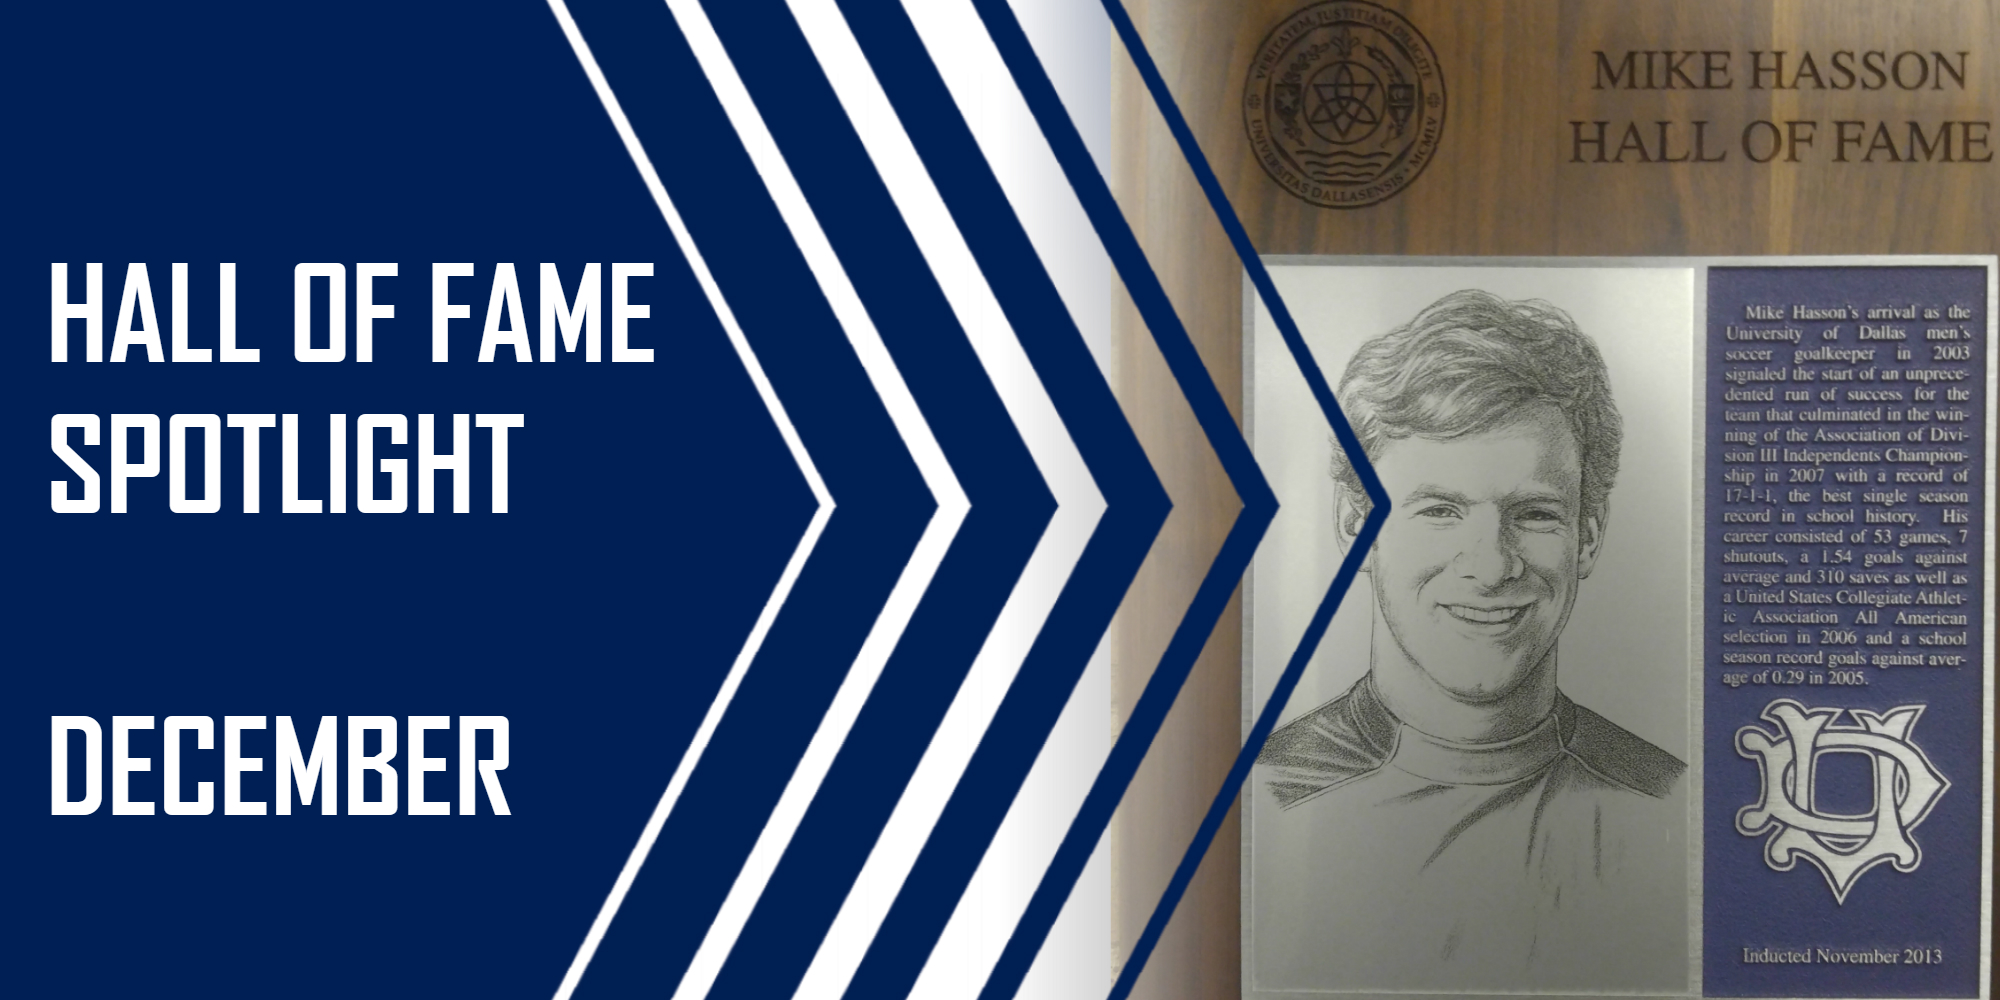 Hall of Fame Spotlight: Mike Hasson